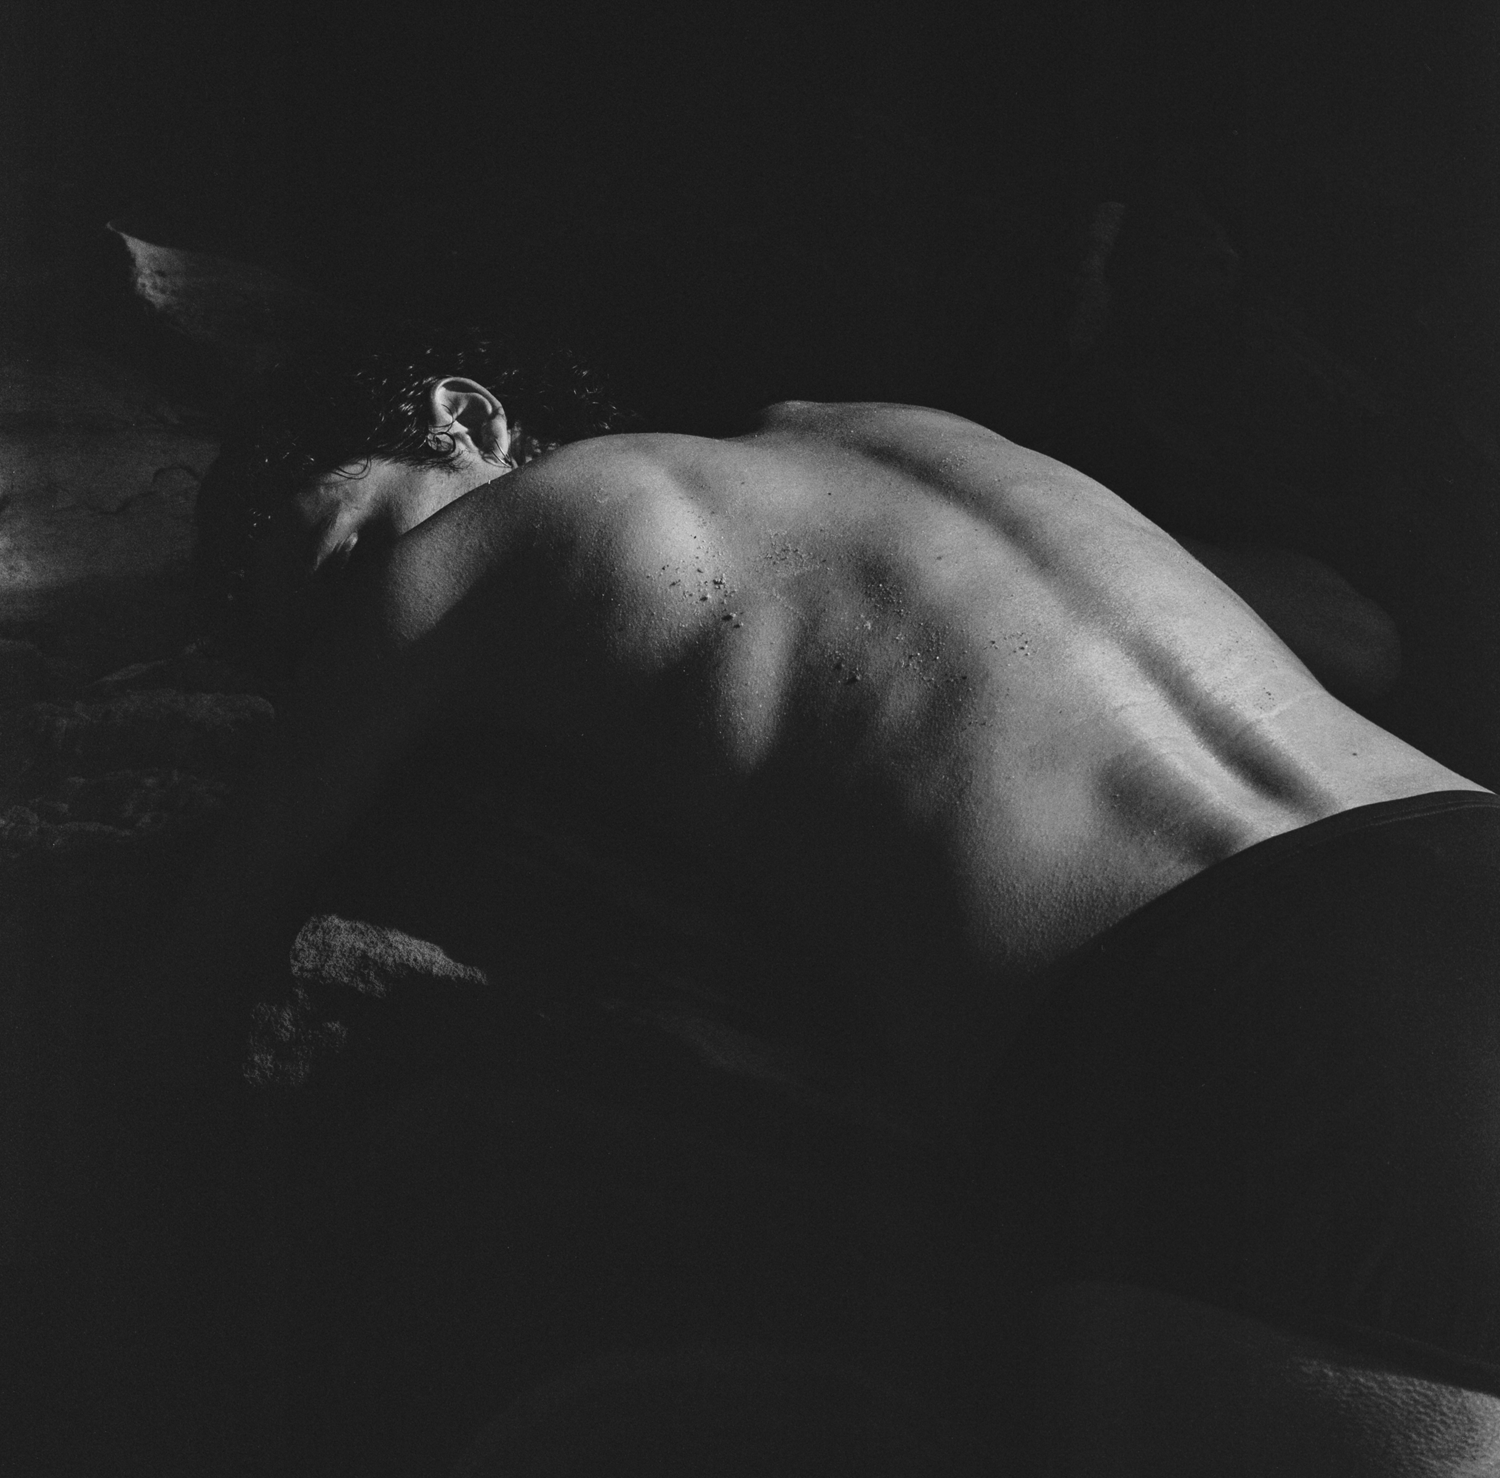 Black and white photograph depicting man's back in sunlight.